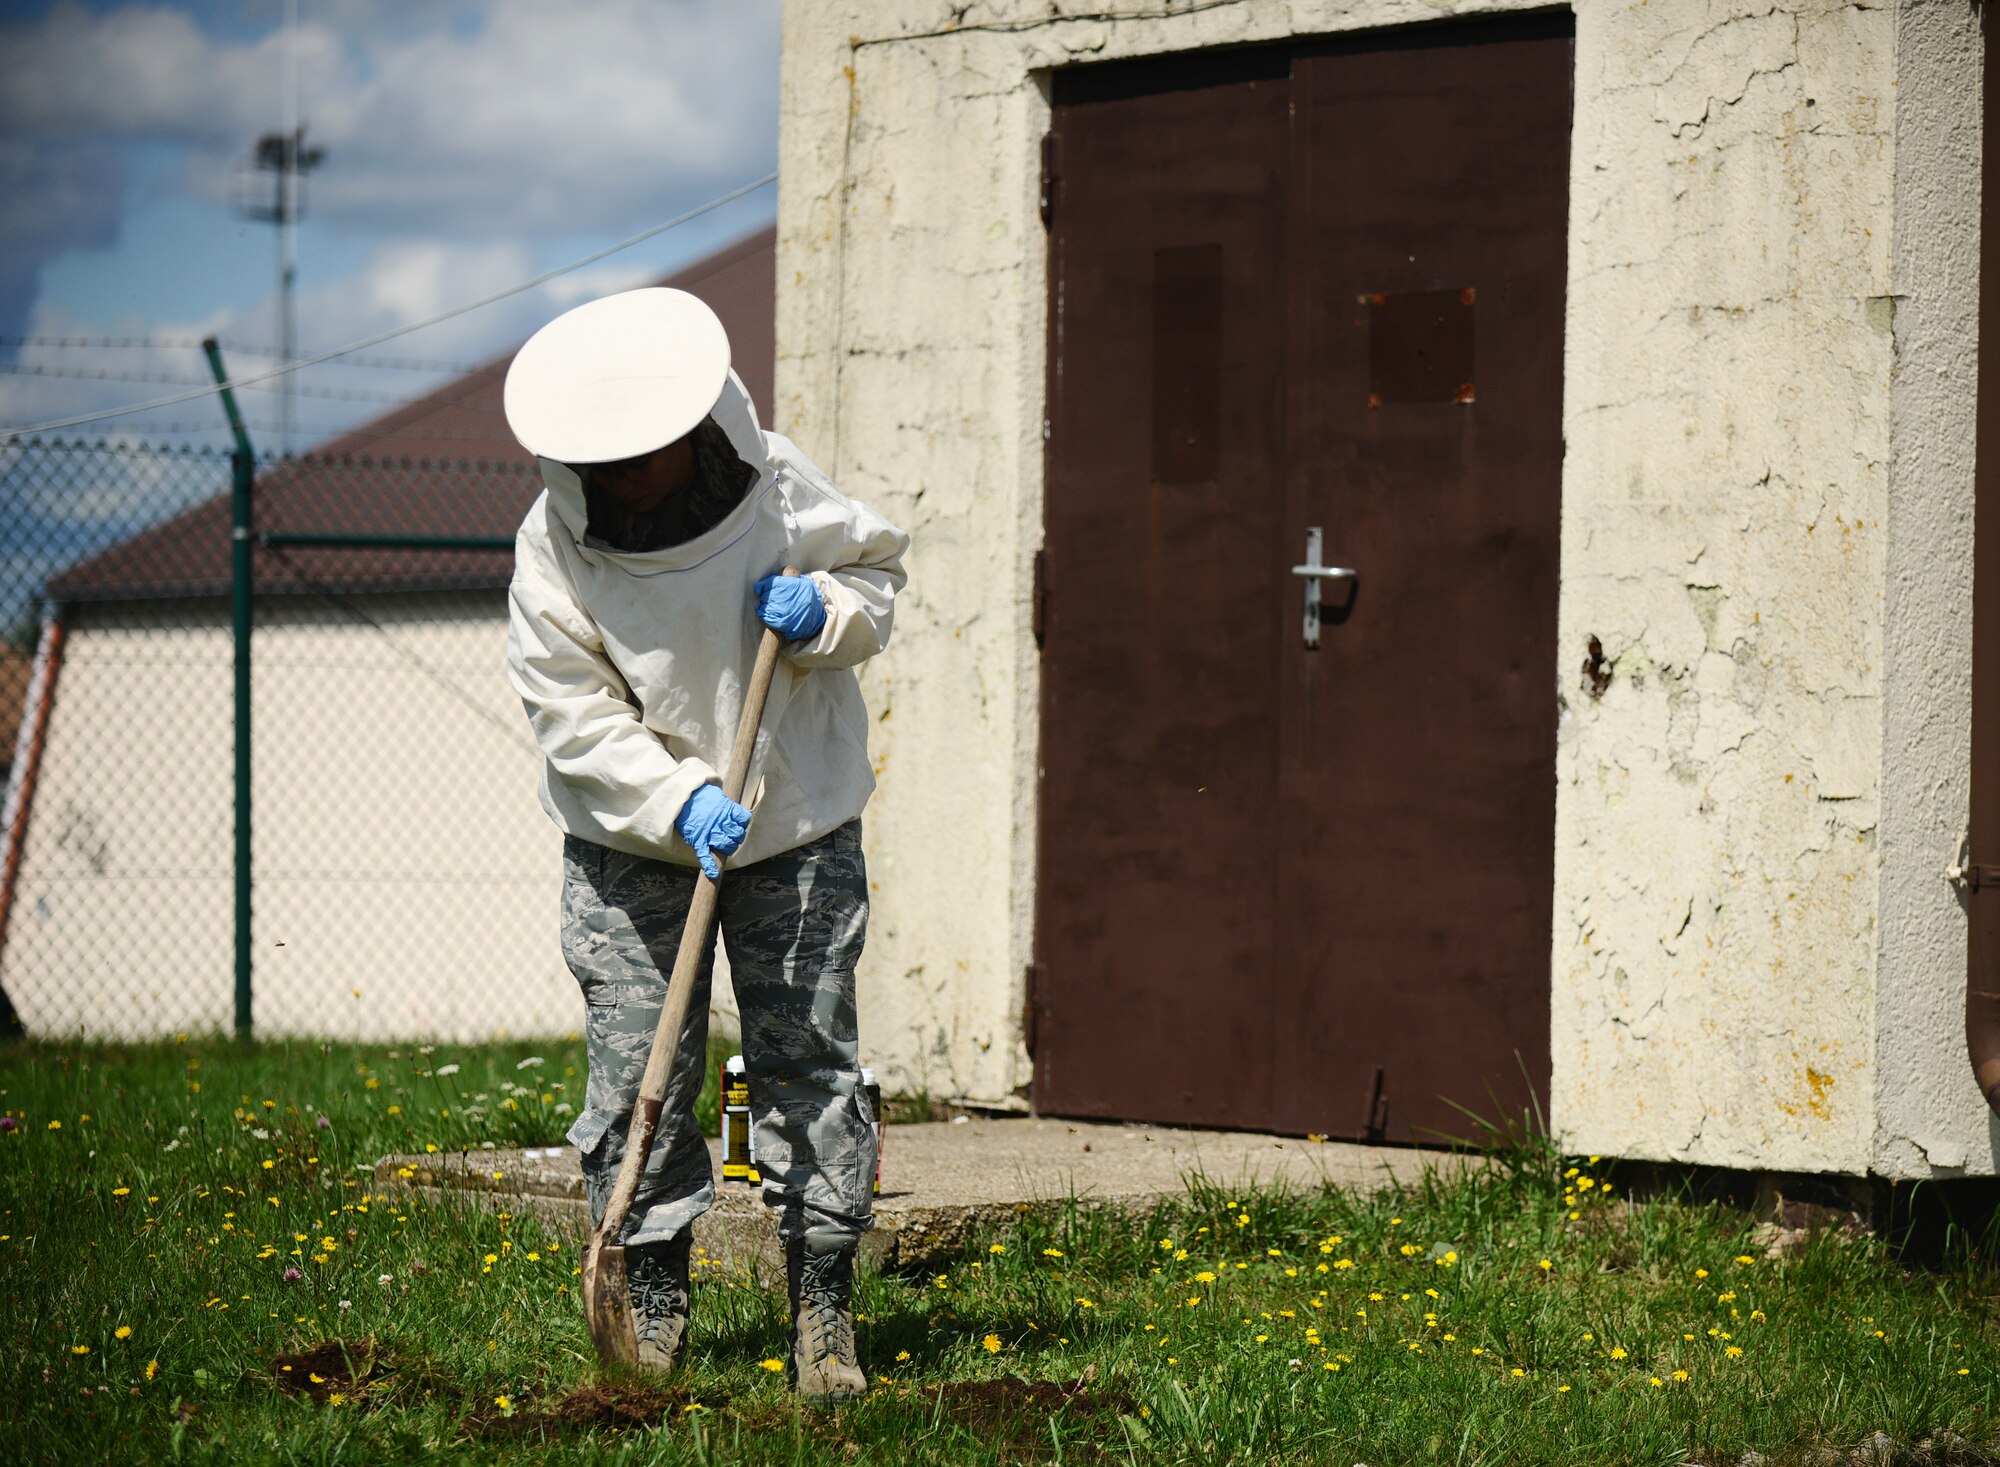 SPANGDAHLEM AIR BASE, Germany -- Airman 1st Class Elizabeth McCasland, 52nd Civil Engineer Squadron pest controller, digs up a wasp nest after spraying it with pesticide here Aug. 15. The 52nd Civil Engineer Squadron Pest Management Flight specializes in ridding the base of insects, rodents and animals that may pose harm to base members and daily mission operations. (U.S. Air Force photo/Staff Sgt. Nathanael Callon)